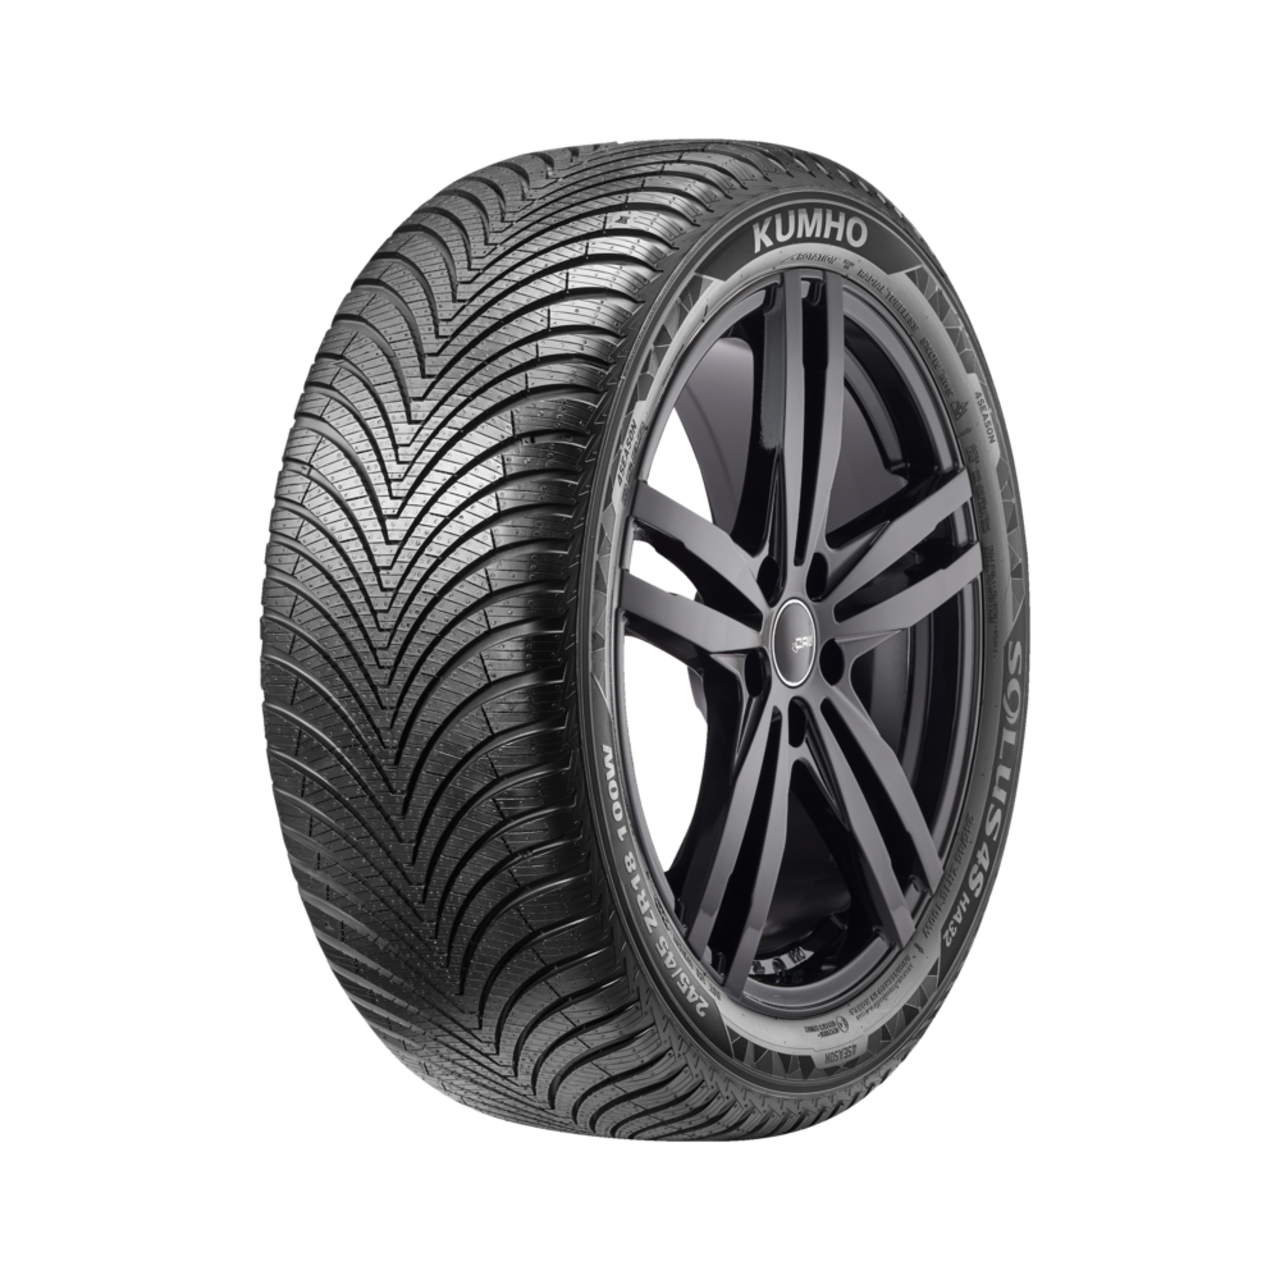 Kumho Solus Tire & For All Passenger | Tire HA32 CUV 4S Canadian Weather